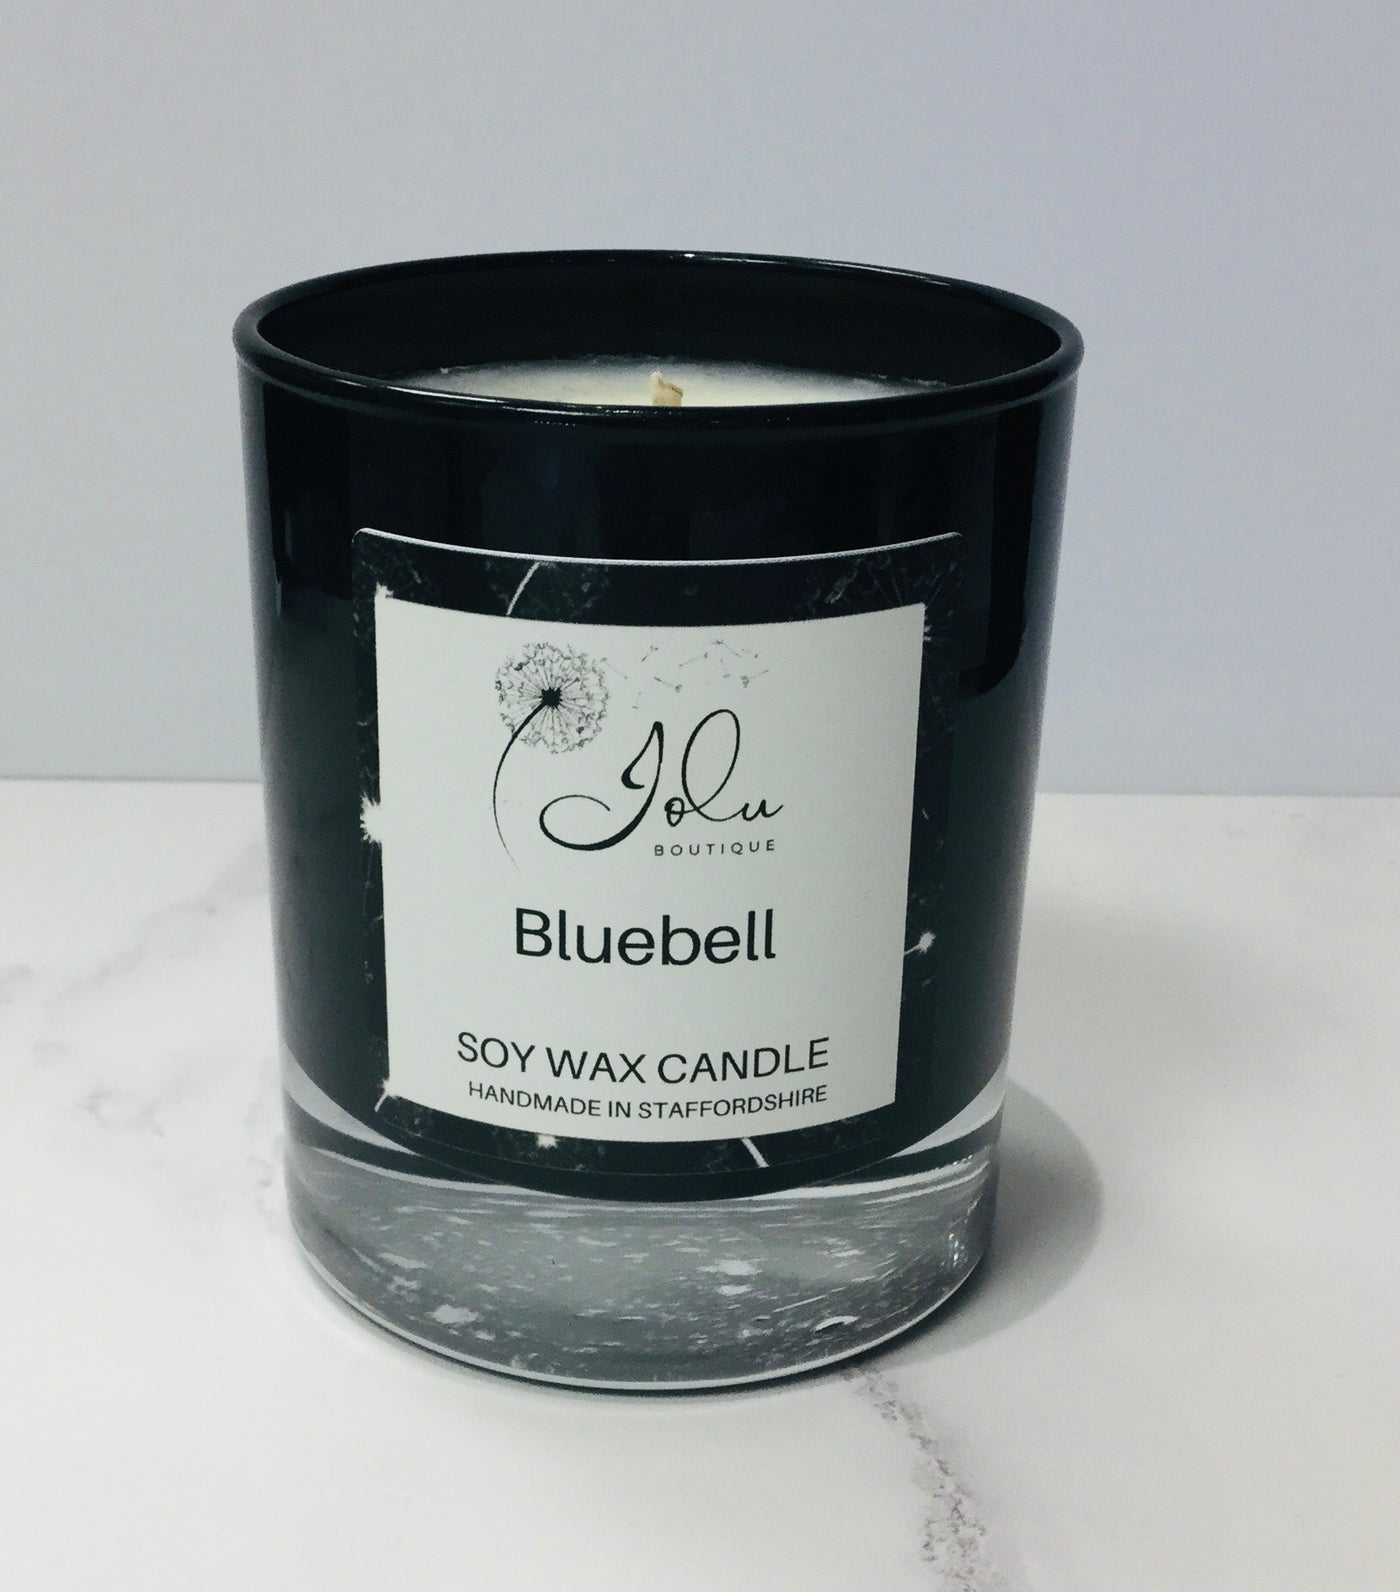 Jolu Boutique Bluebell Soy Wax Candle